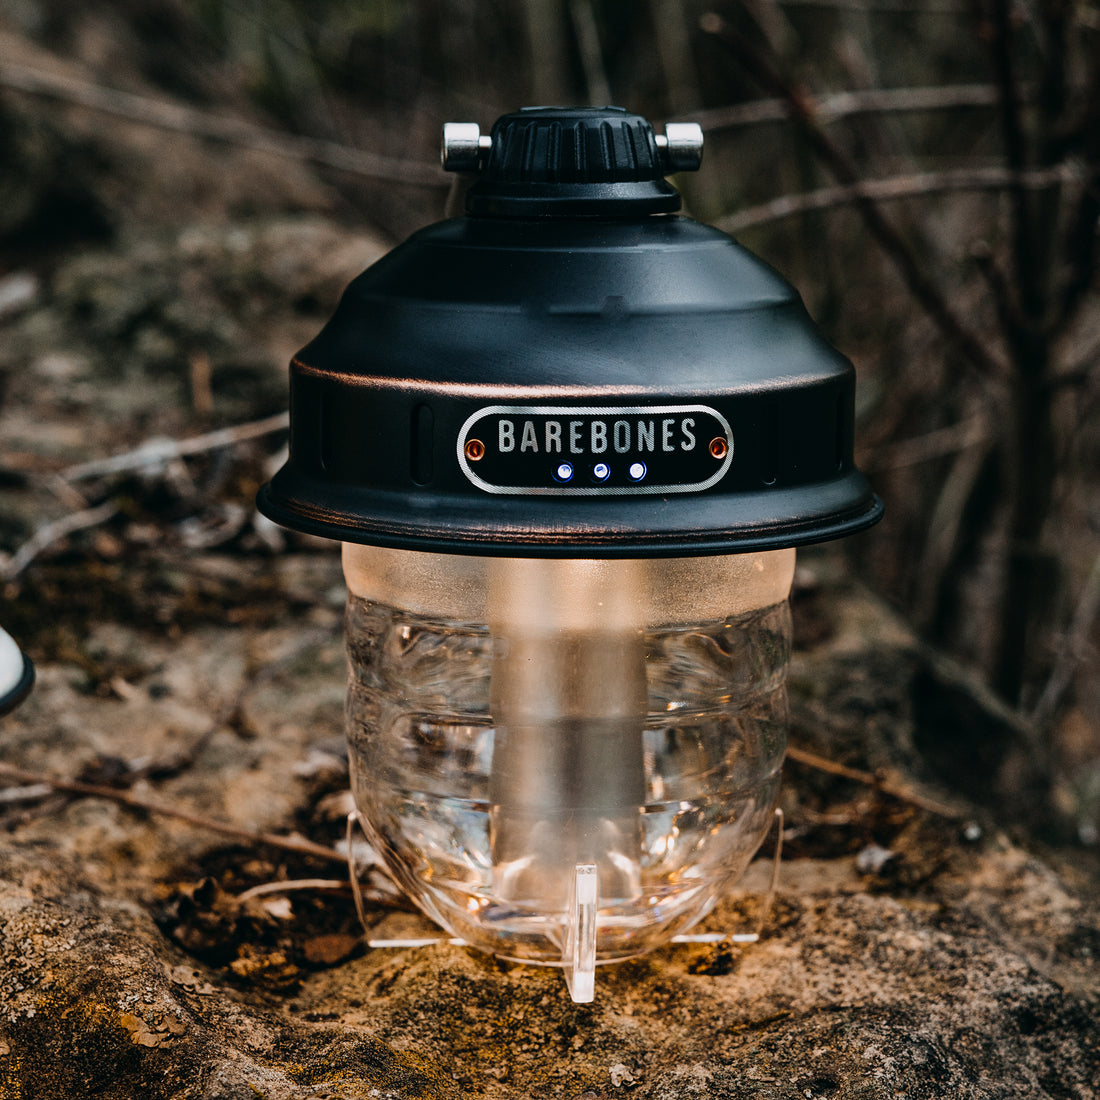 Northwest Territory Portable Battery Operated or 9 Volt Camping Lantern  Light